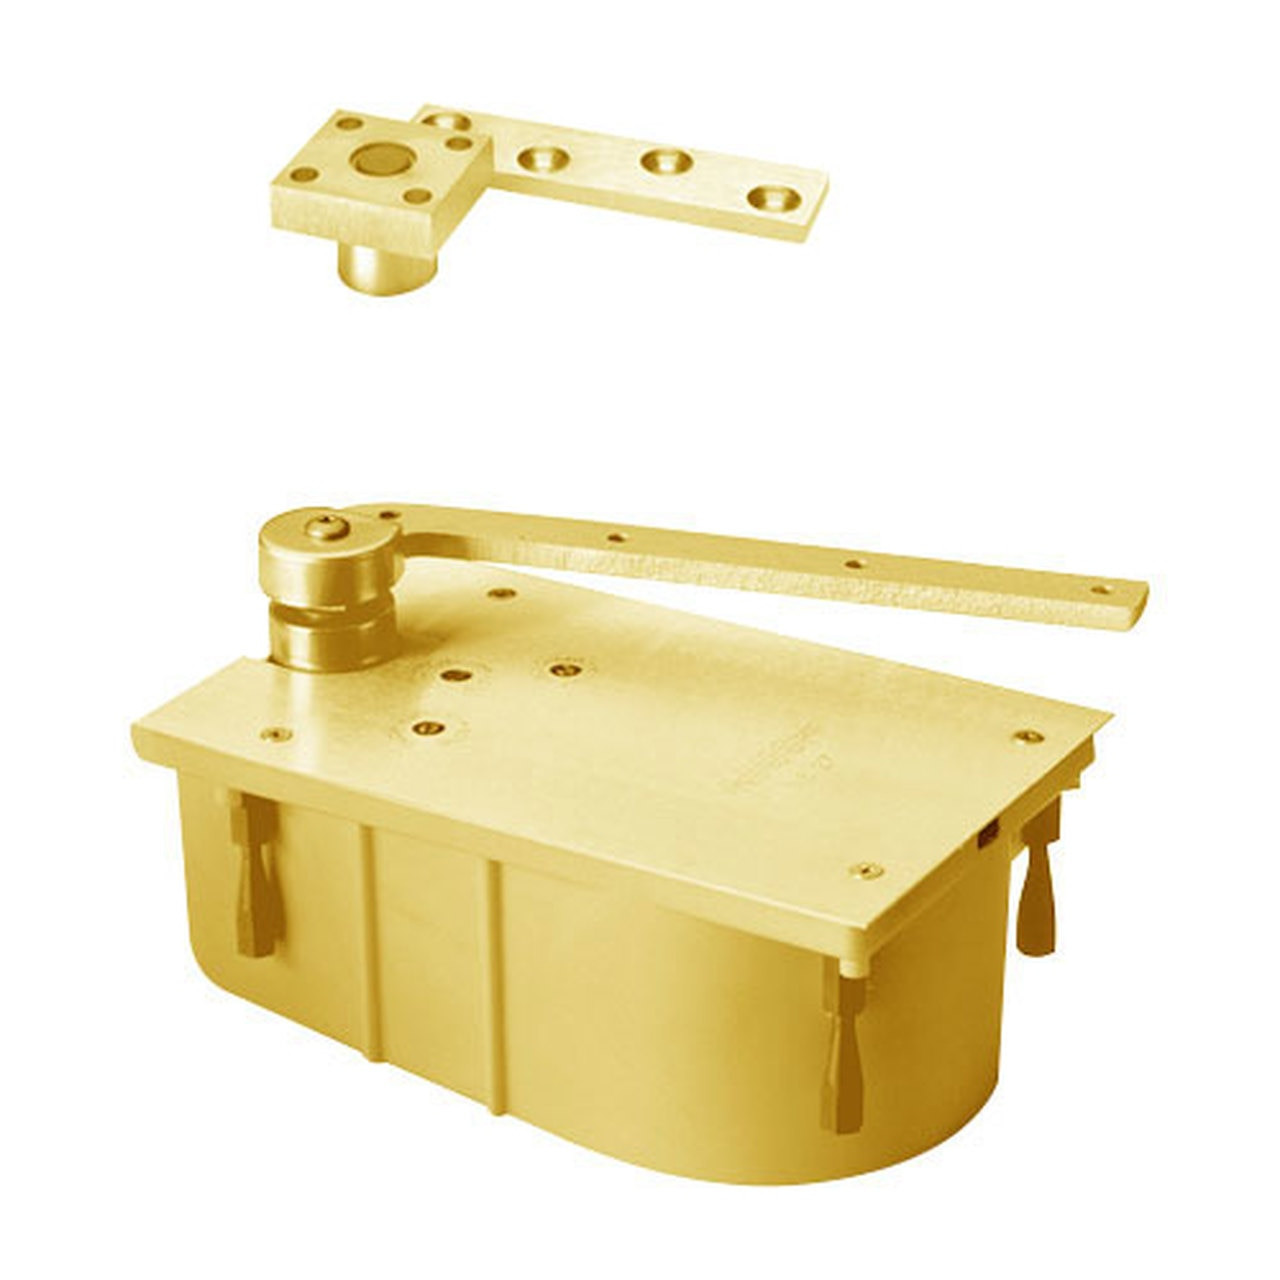 427-95N-LCC-LH-605 Rixson 427 Series Heavy Duty 3/4" Offset Hung Floor Closer in Bright Brass Finish